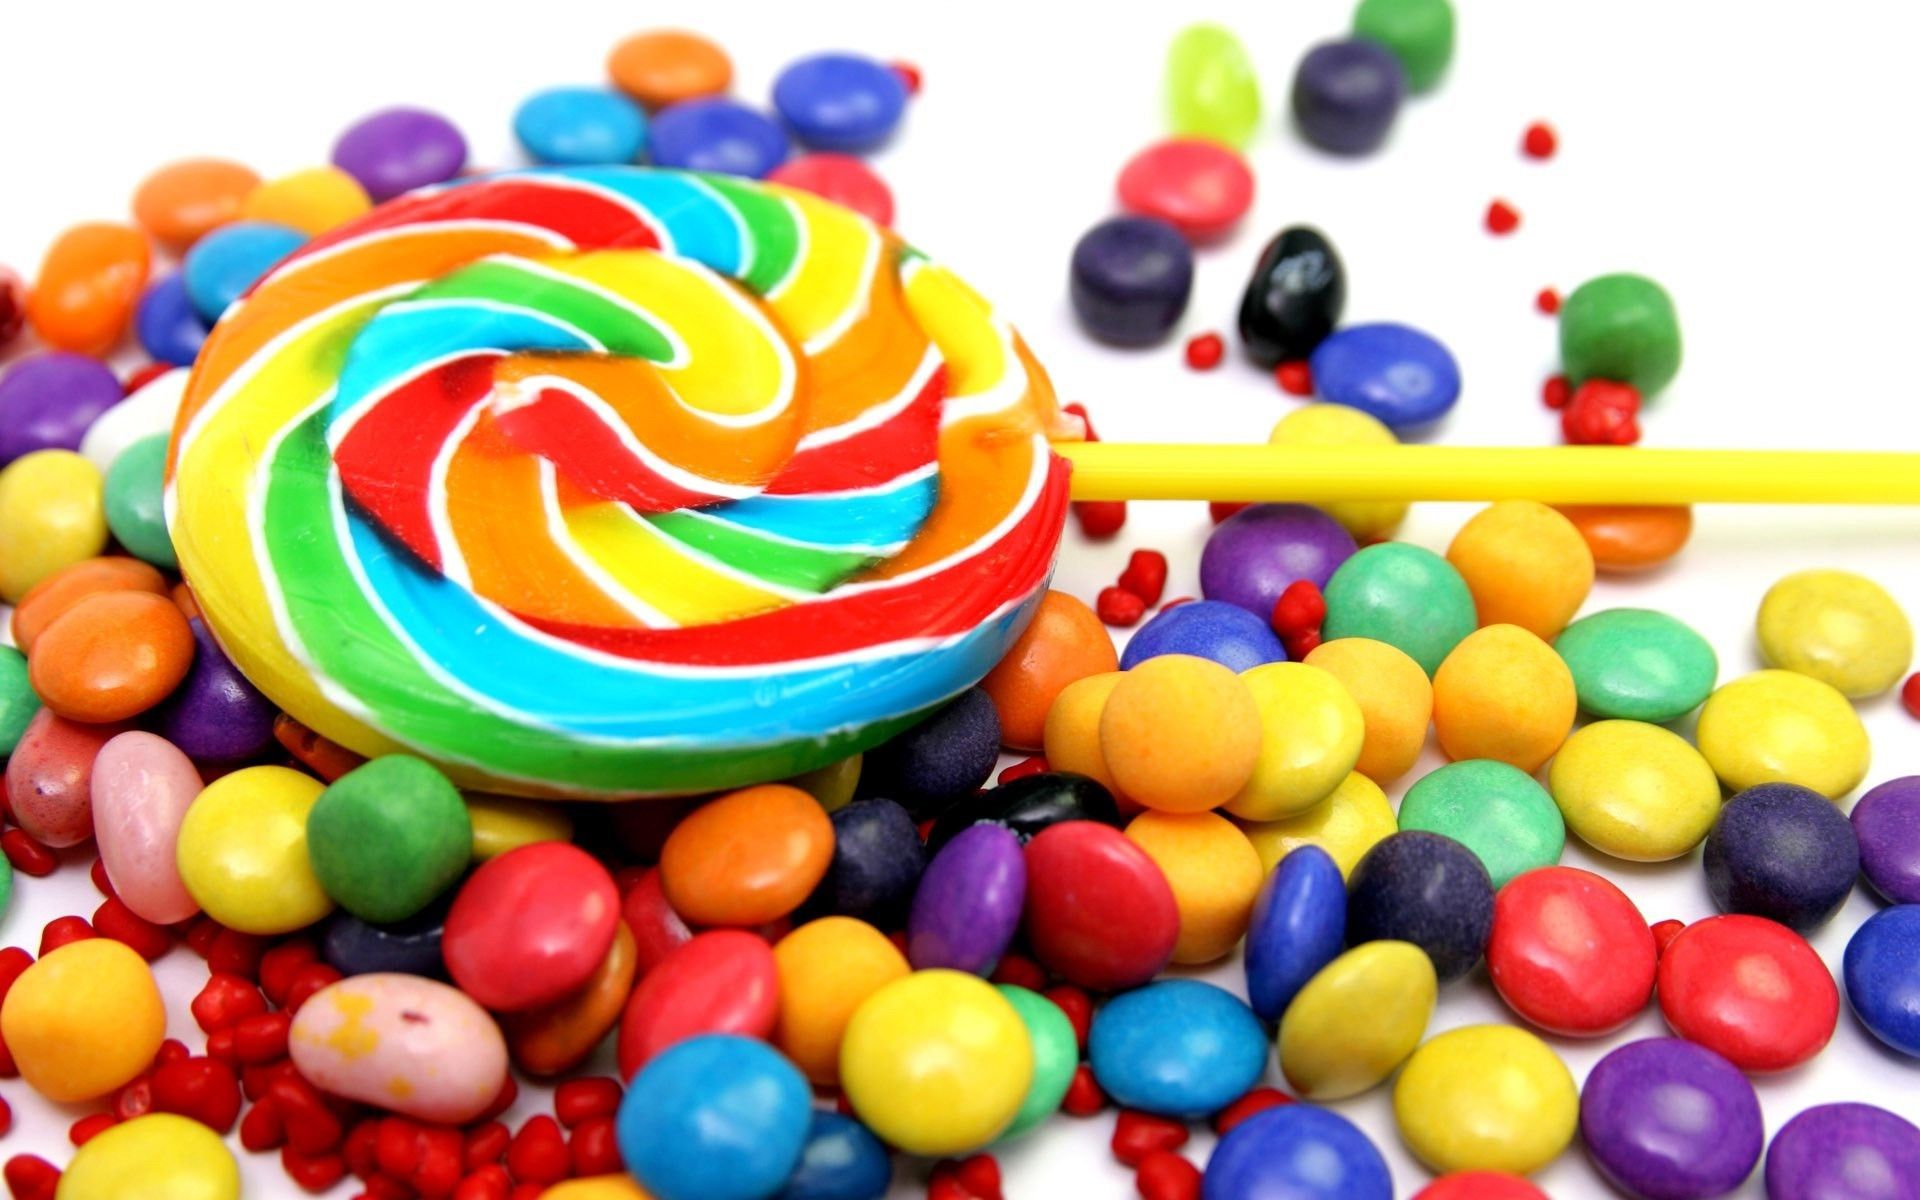 Candy Images Hd - HD Wallpaper 